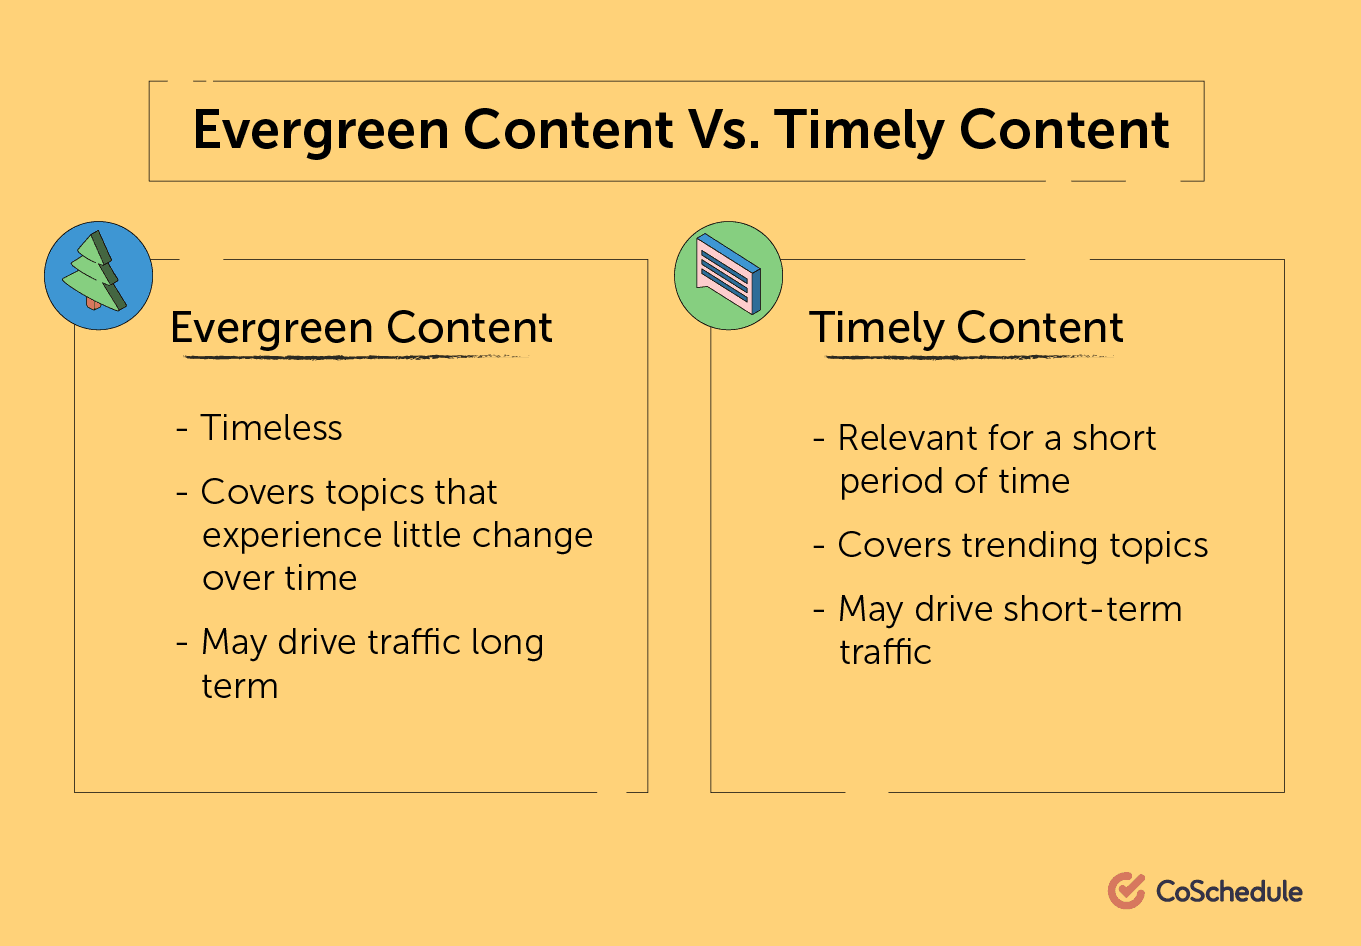 Evergreen content vs. timely content